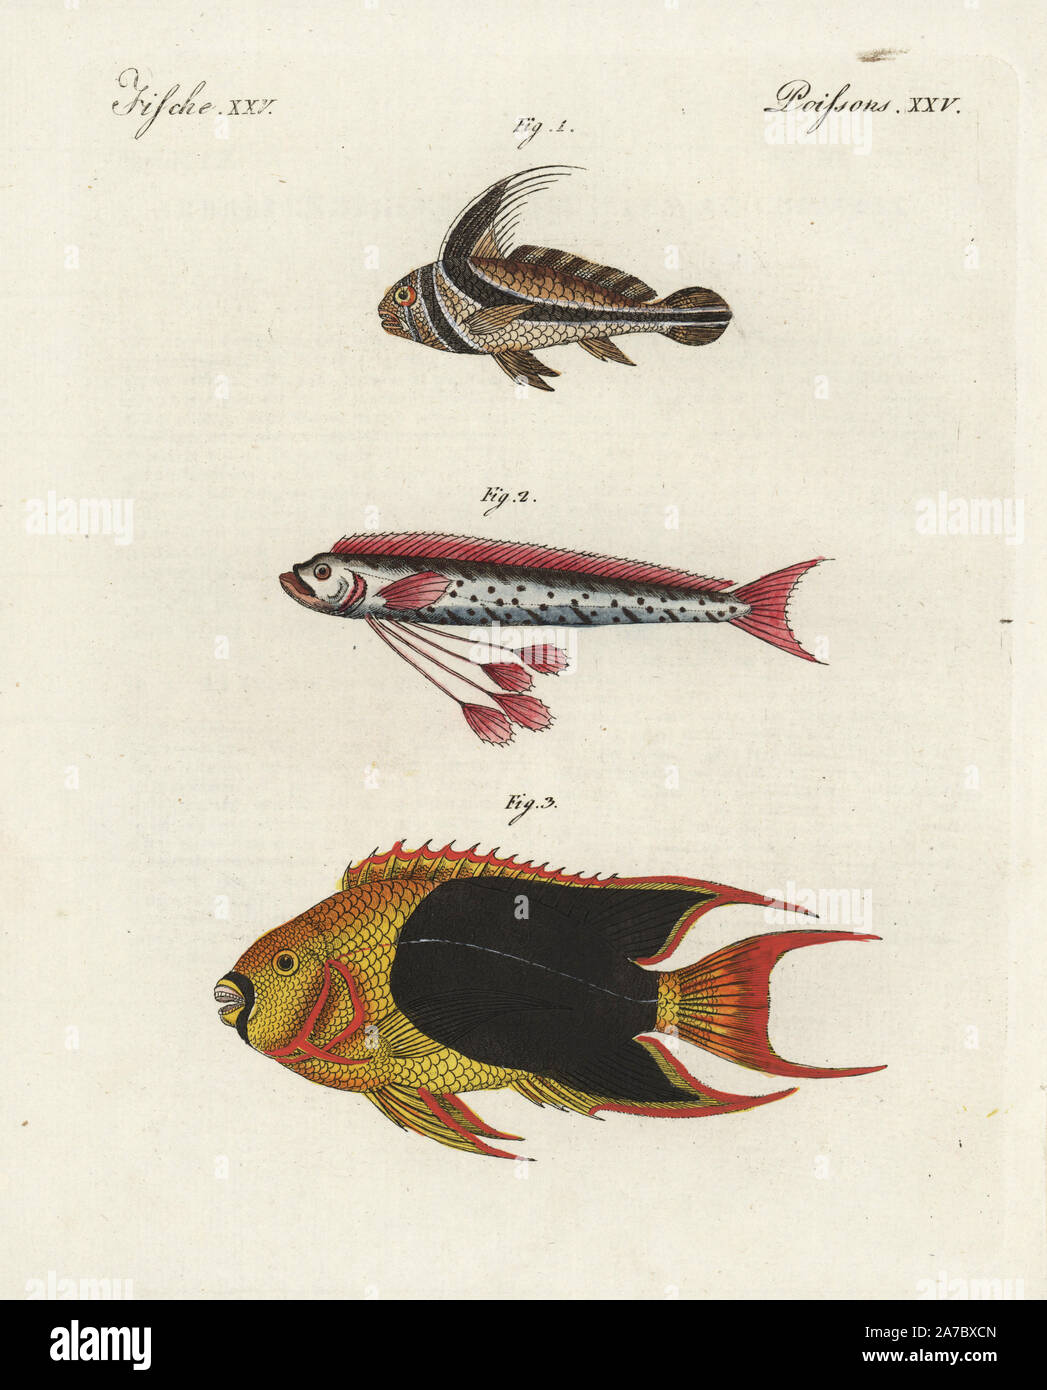 Jack-knifefish, Equetus lanceolatus 1, oarfish, Regalecus glesne 2, and rock beauty angelfish, Holacanthus tricolor 3. Handcoloured copperplate engraving from Bertuch's 'Bilderbuch fur Kinder' (Picture Book for Children), Weimar, 1798. Friedrich Johann Bertuch (1747-1822) was a German publisher and man of arts most famous for his 12-volume encyclopedia for children illustrated with 1,200 engraved plates on natural history, science, costume, mythology, etc., published from 1790-1830. Stock Photo